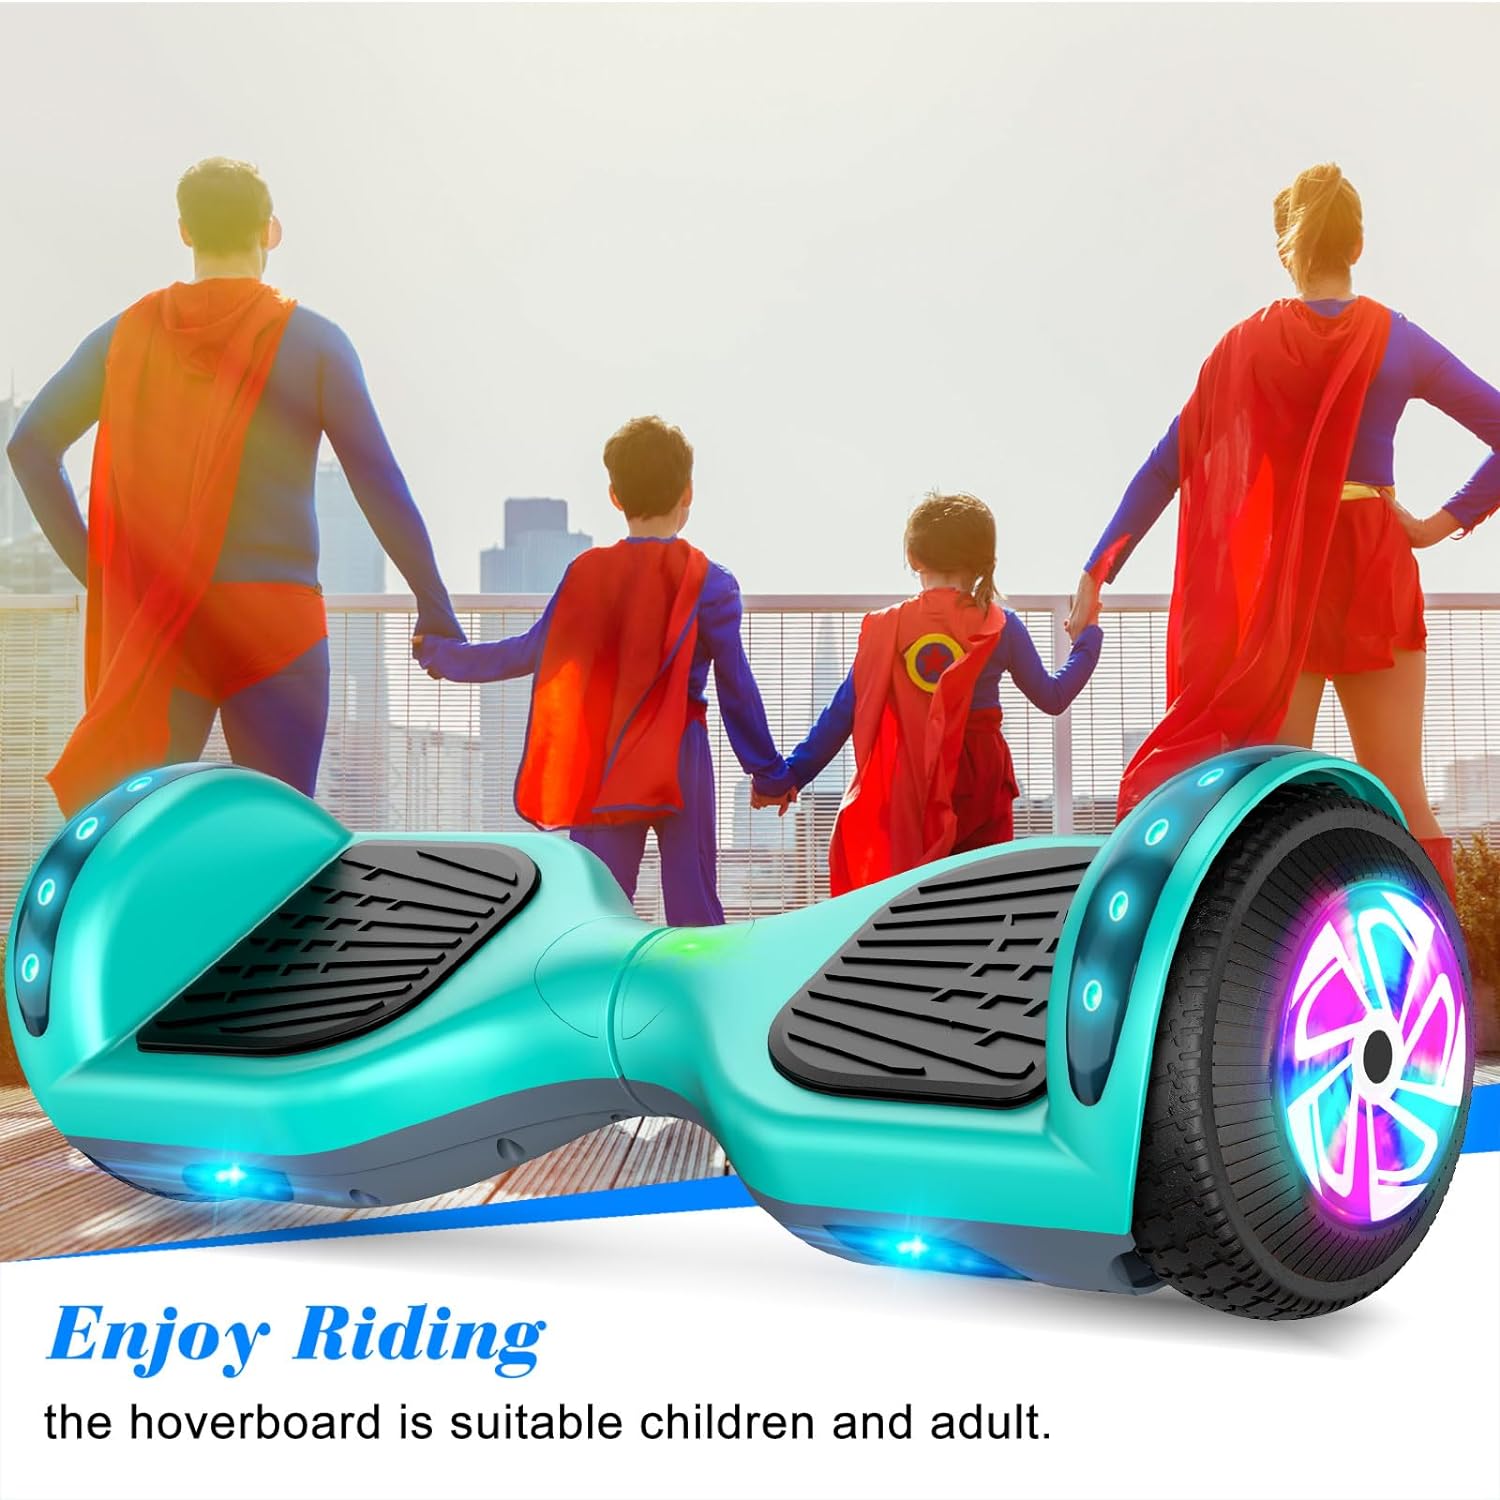 FLYING-ANT Hoverboard, 6.5 Inch Self Balancing Hoverboards with Bluetooth and Flashing LED Lights, Hover Board for Kids Teenagers